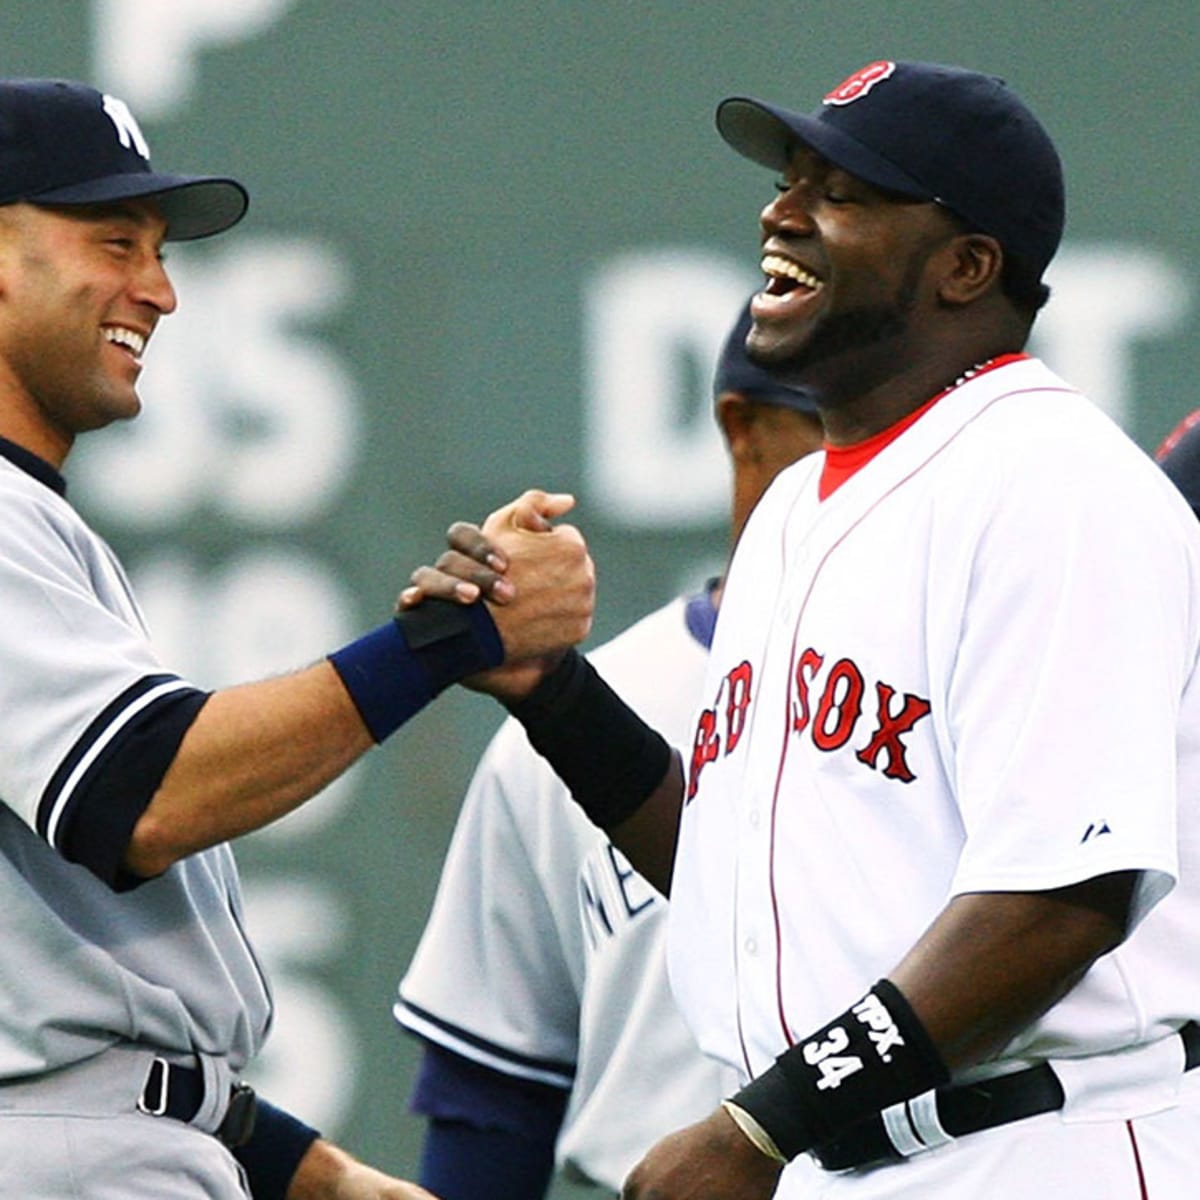 Derek Jeter is gifted a Jeter Red Sox jersey by David Ortiz : r/baseball